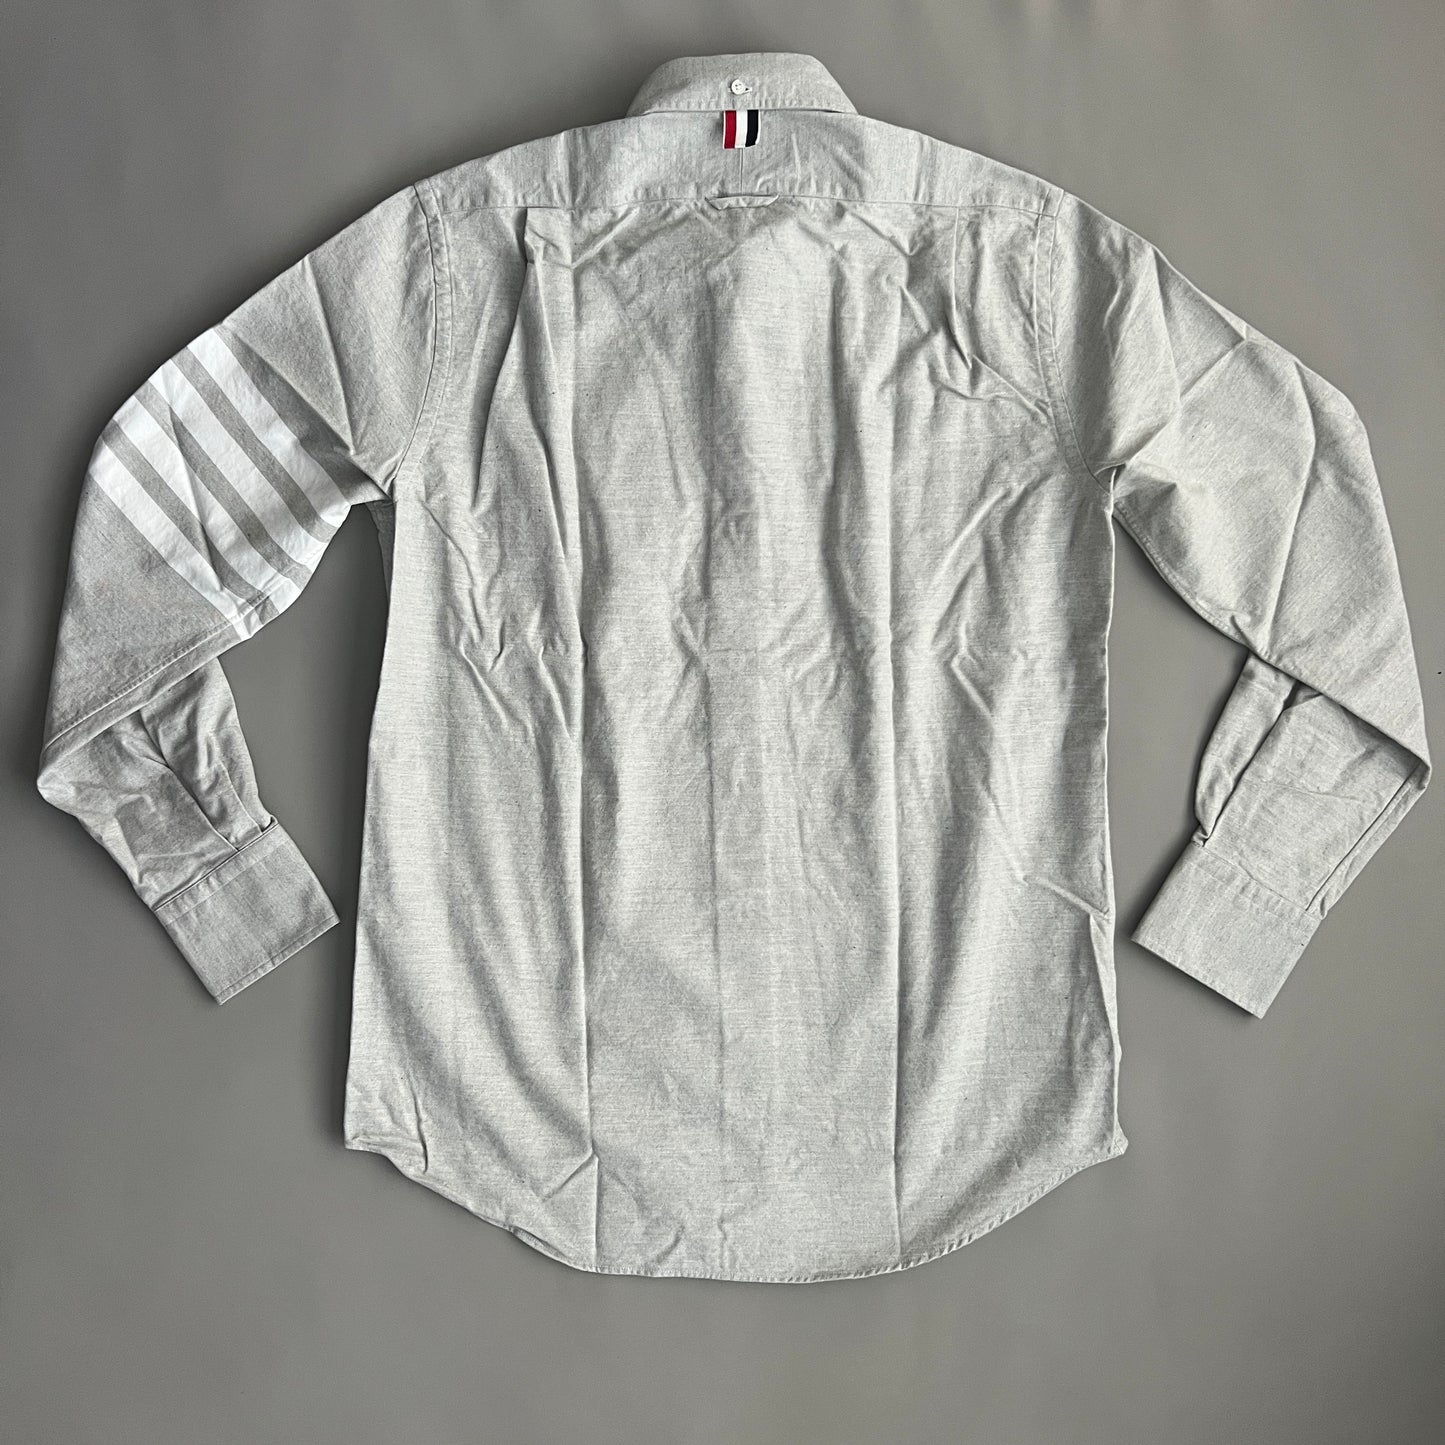 THOM BROWNE Straight Fit Button-Down Long Sleeve w/CB RWB Flannel shirt w/woven 4 Bar Sleeve in Med Grey Size 3 (NEW)